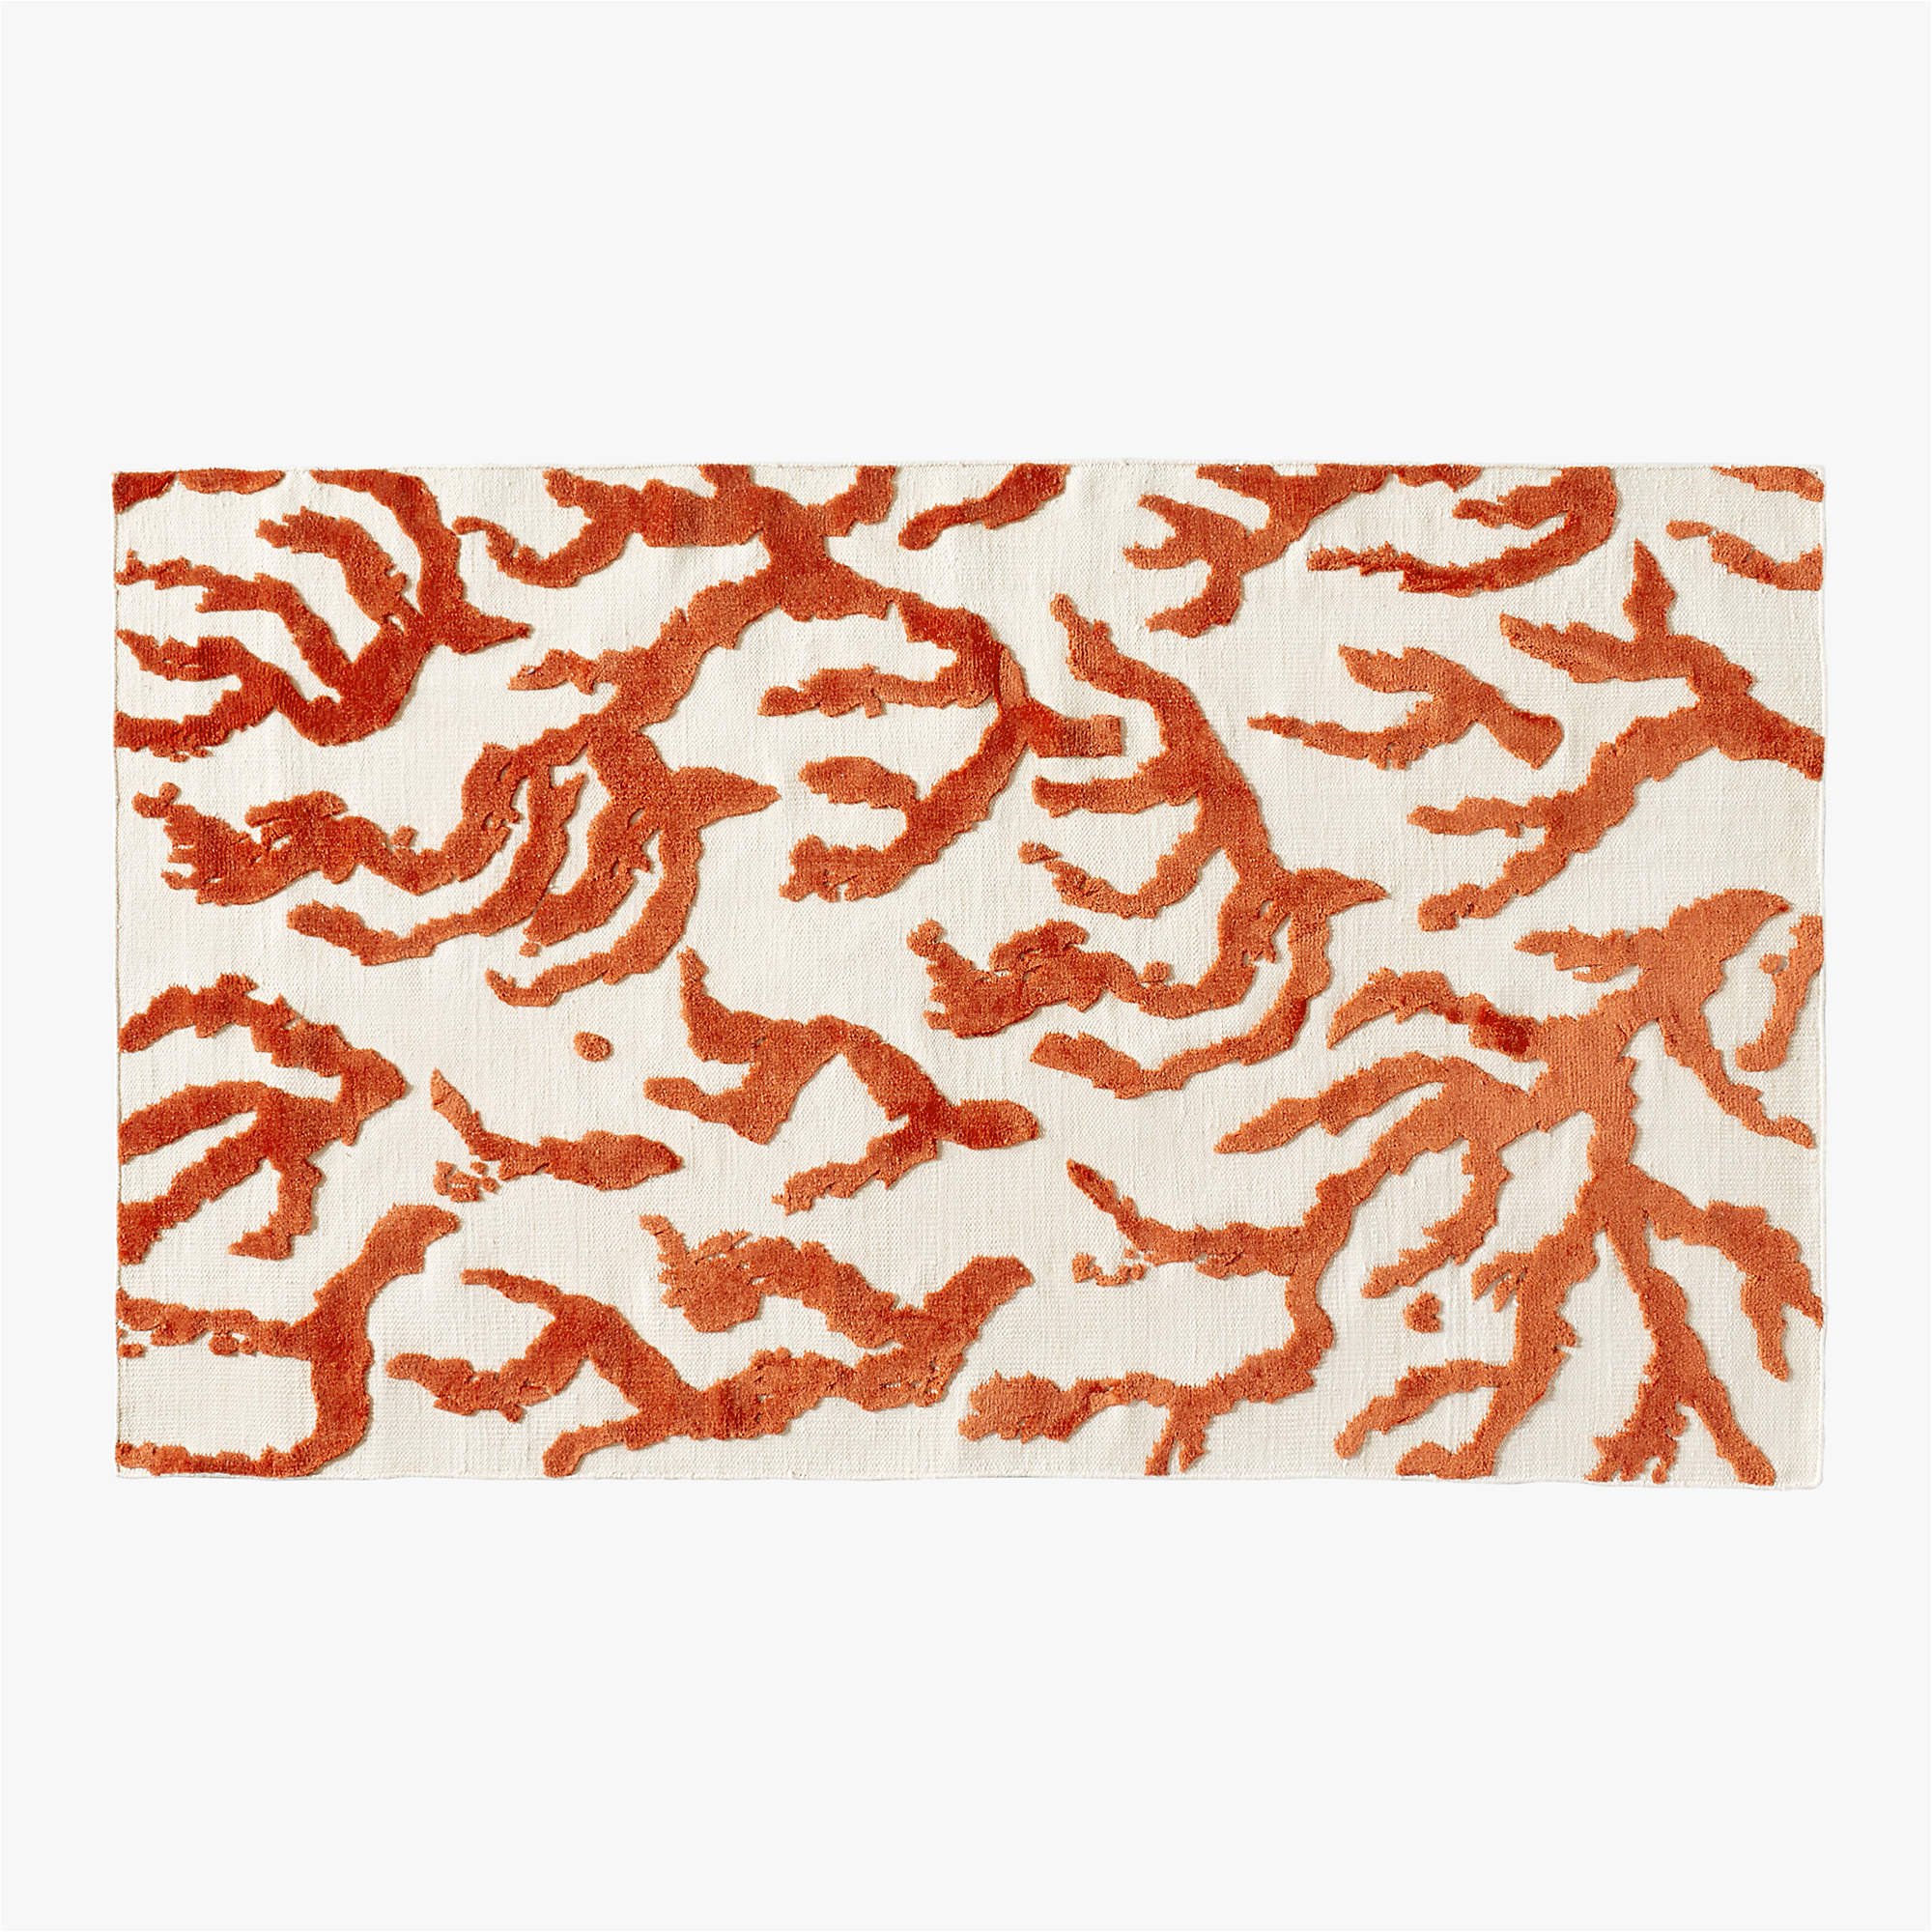 corail-hand-knotted-coral-indoor-outdoor-performance-area-rug-5x8.jpg